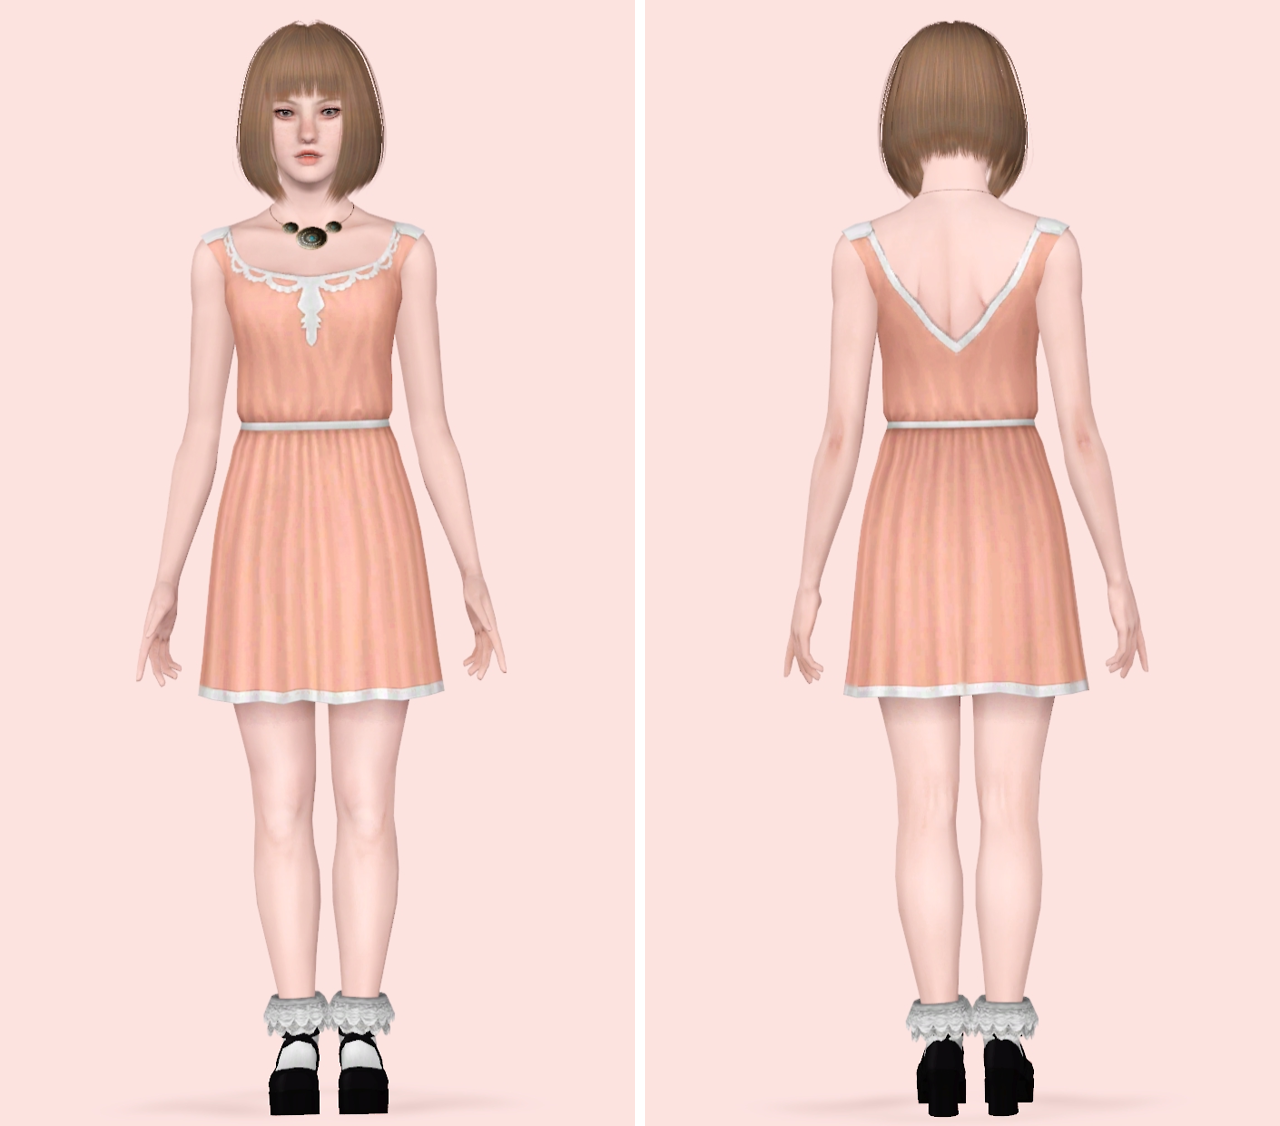 Clothing Converted for Teen Females by Cuddlykidssims.